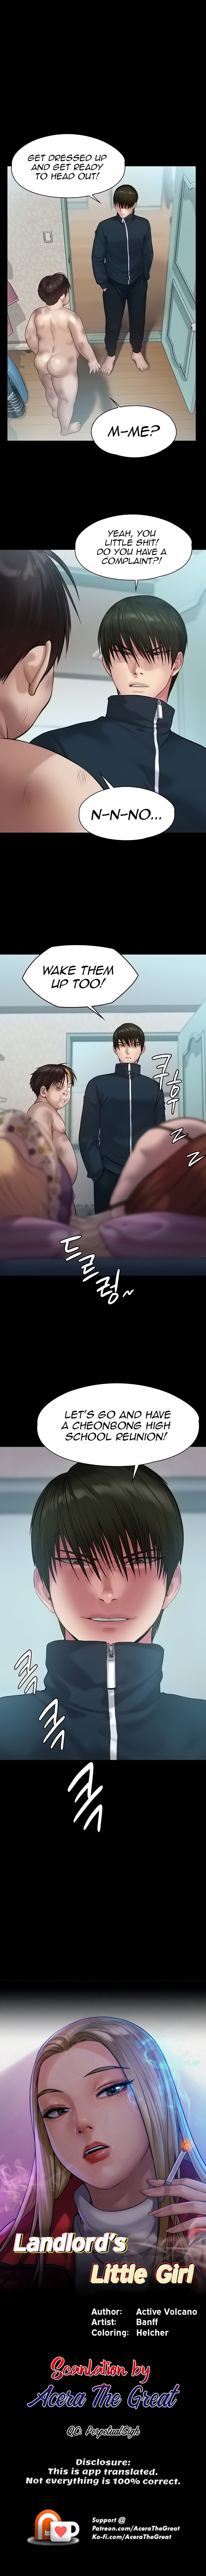 Panel Image 1 for chapter 215 of manhwa Queen Bee on read.oppai.stream